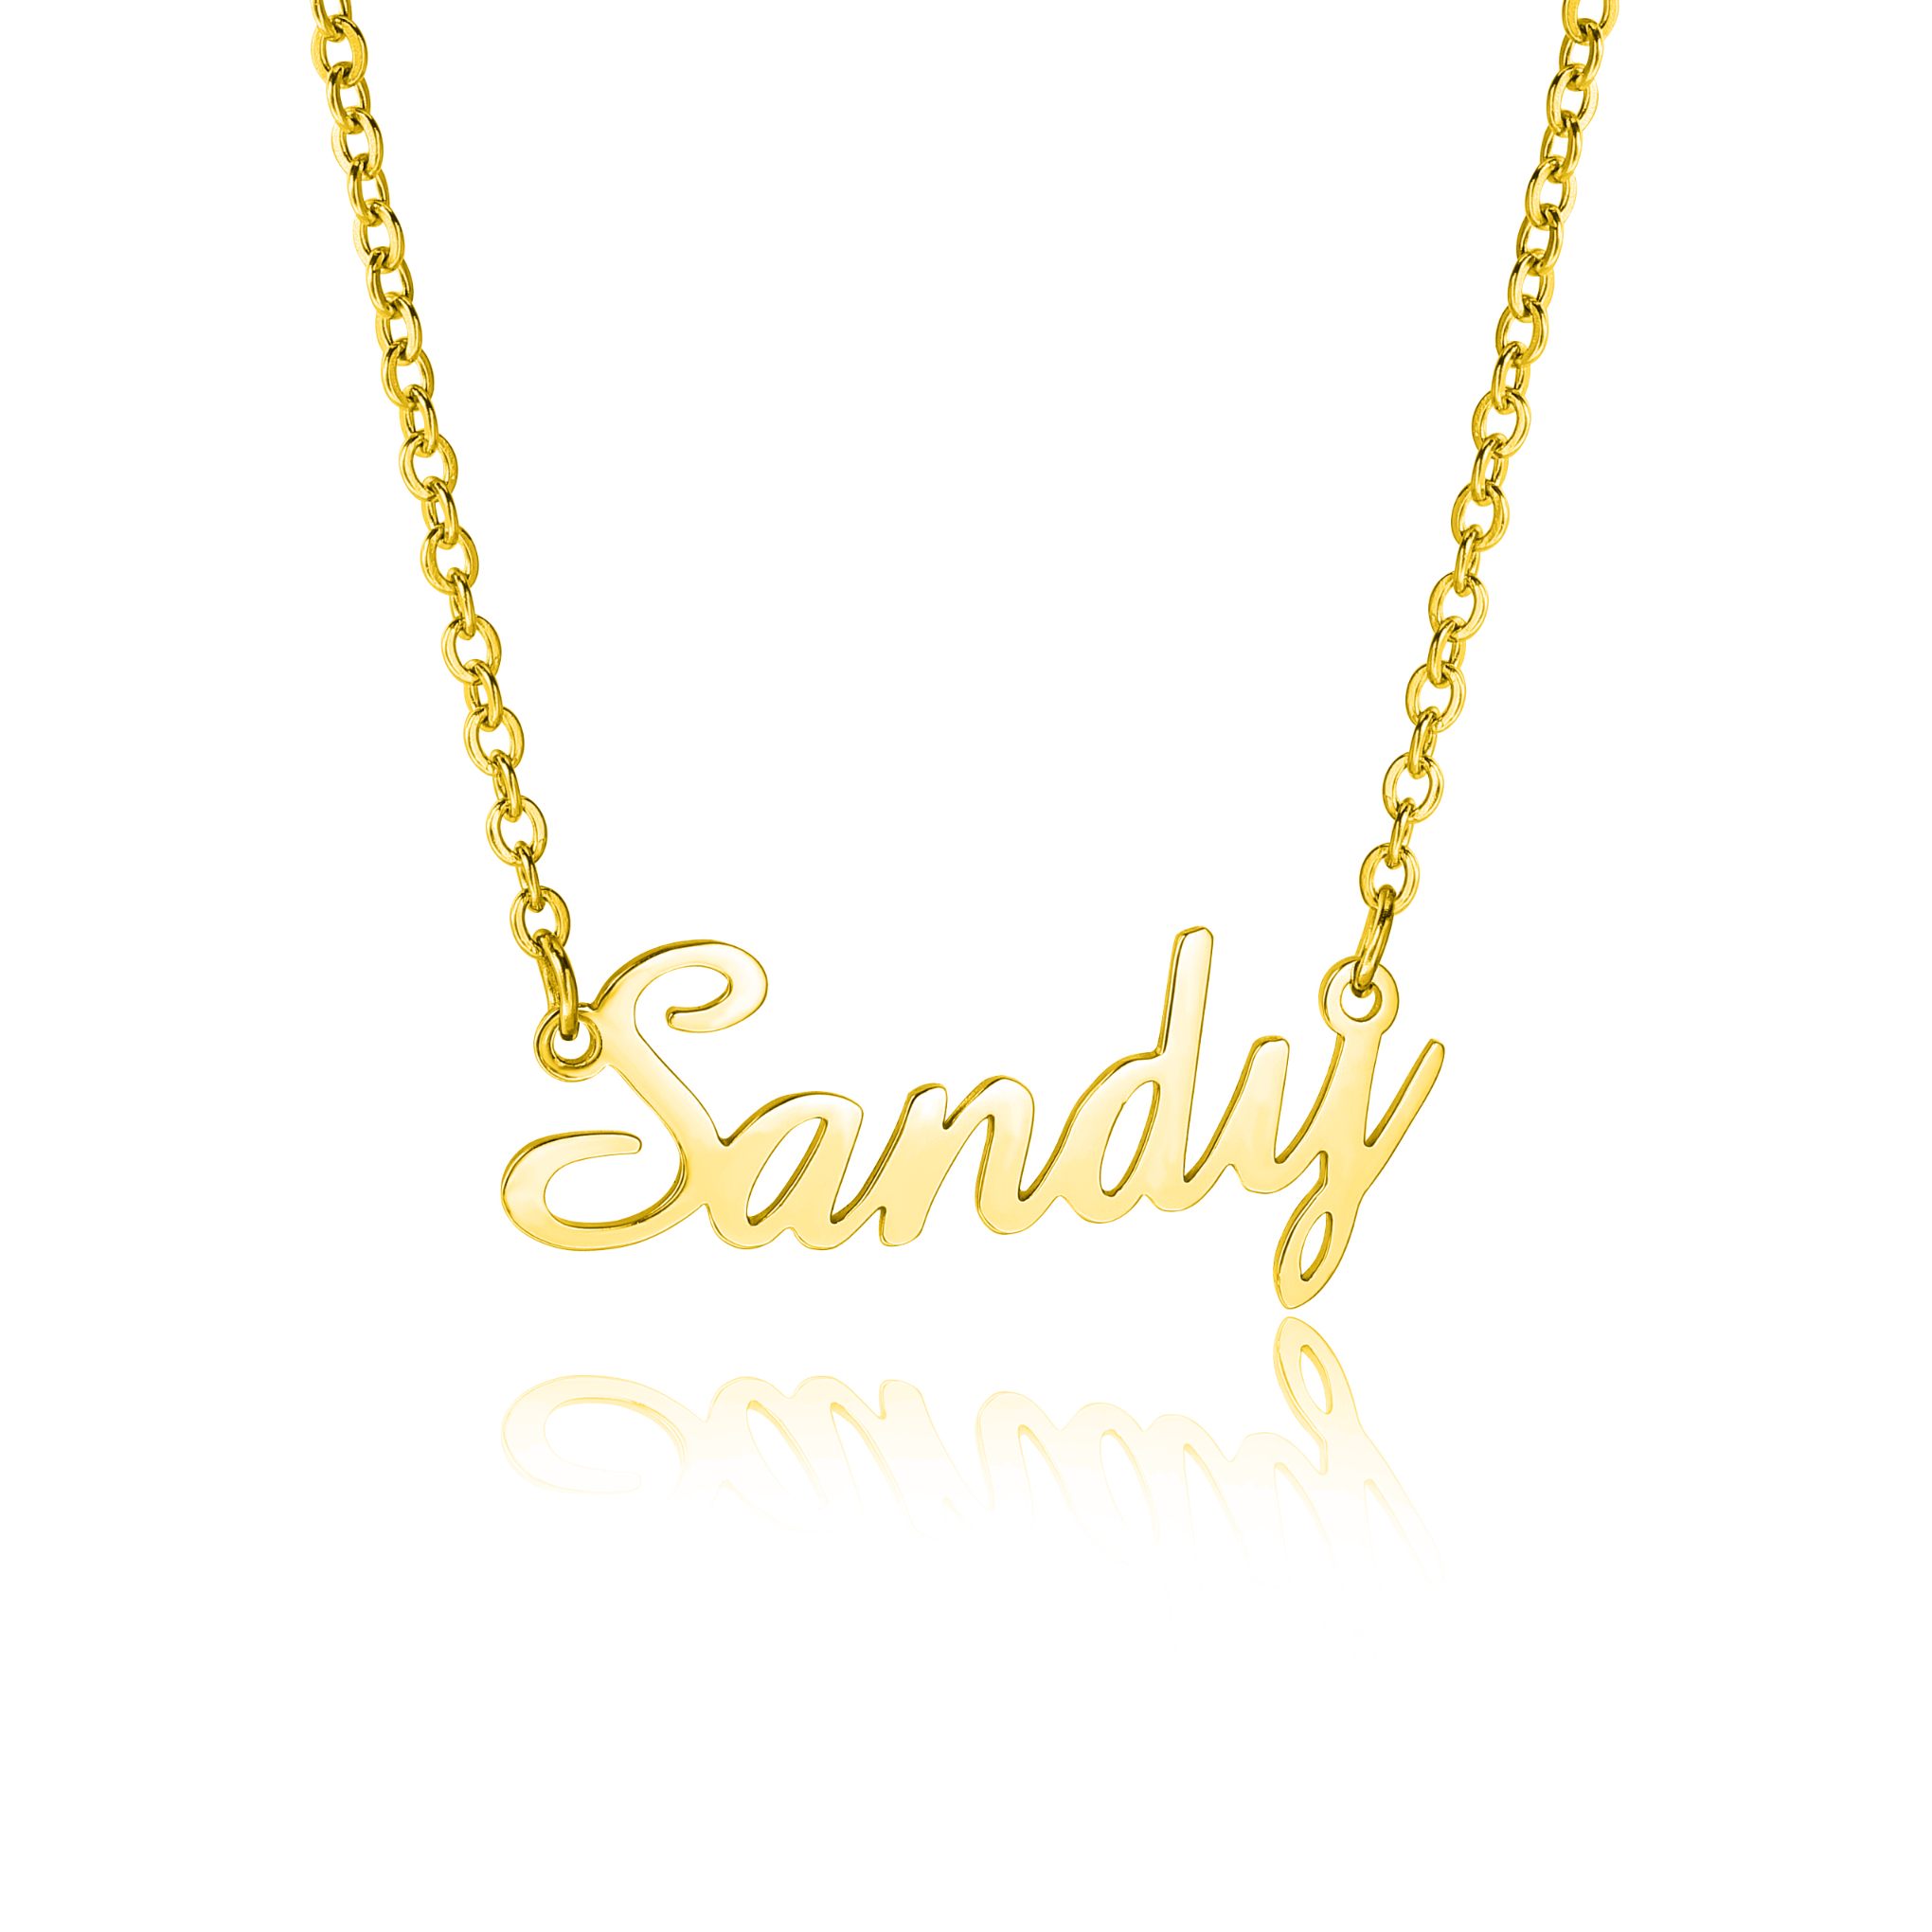 sandy style name necklace personalized gift idea 18k gold plated